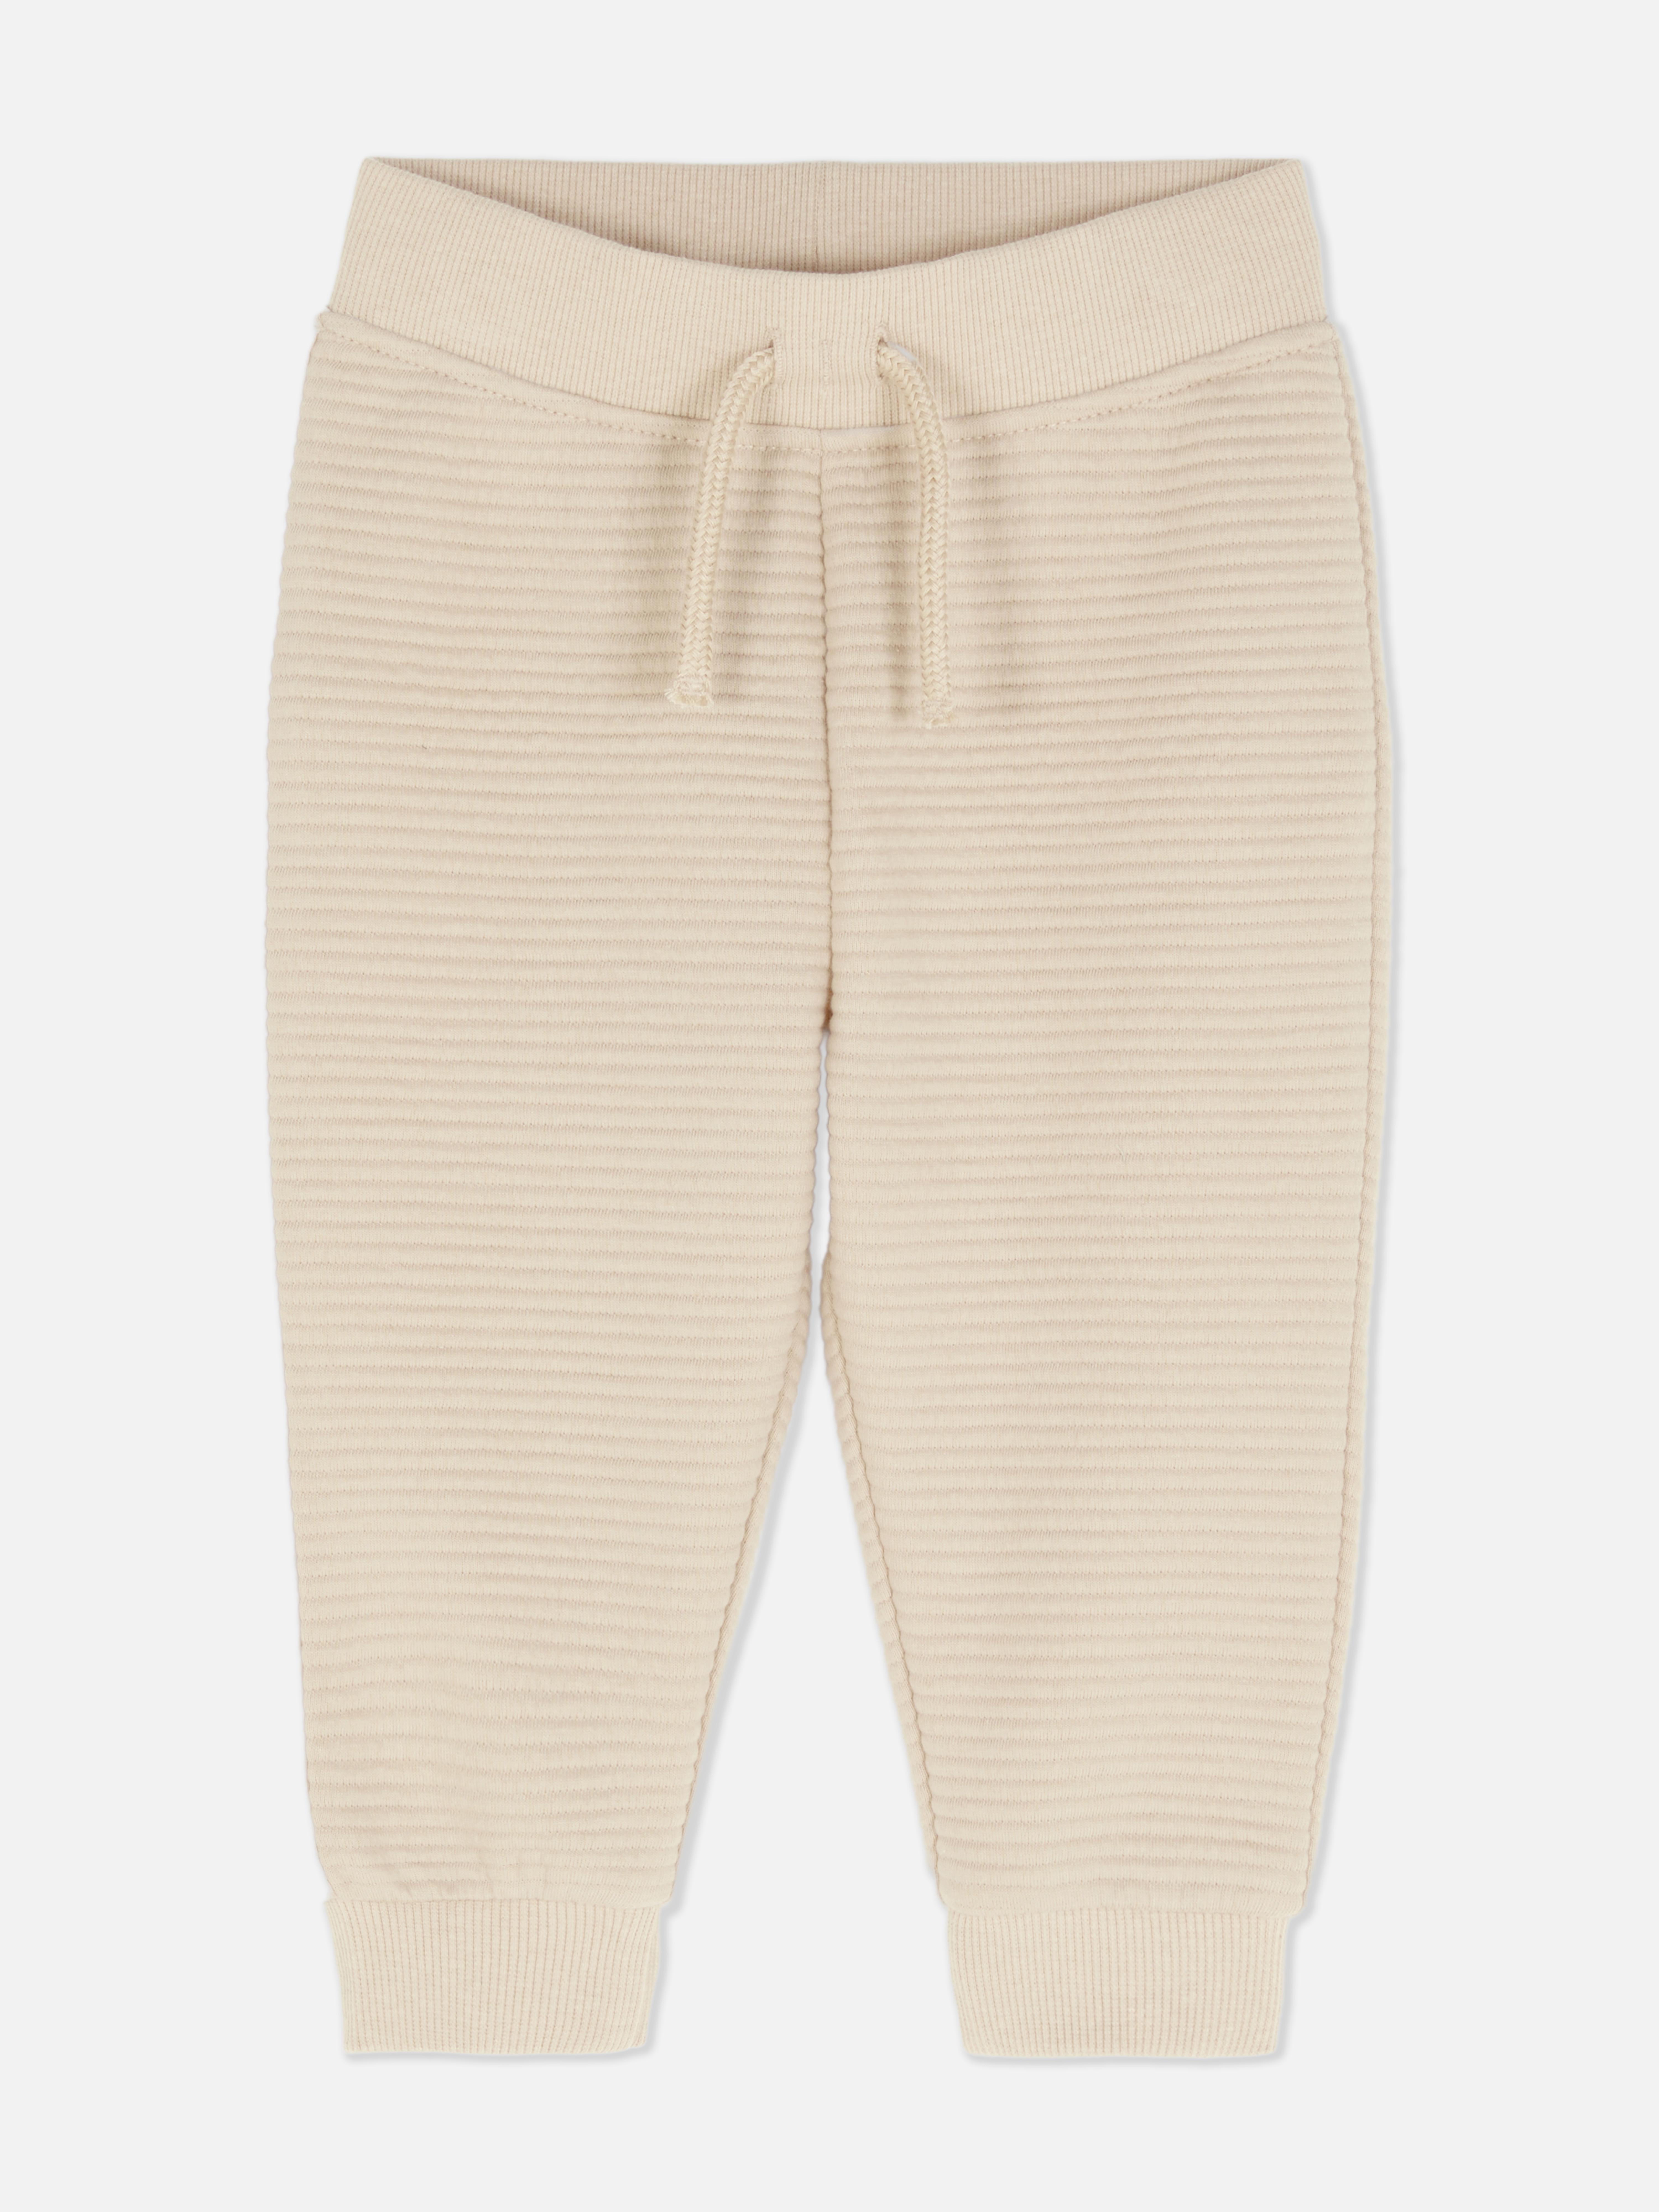 Co-ord Soft Ribbed Joggers